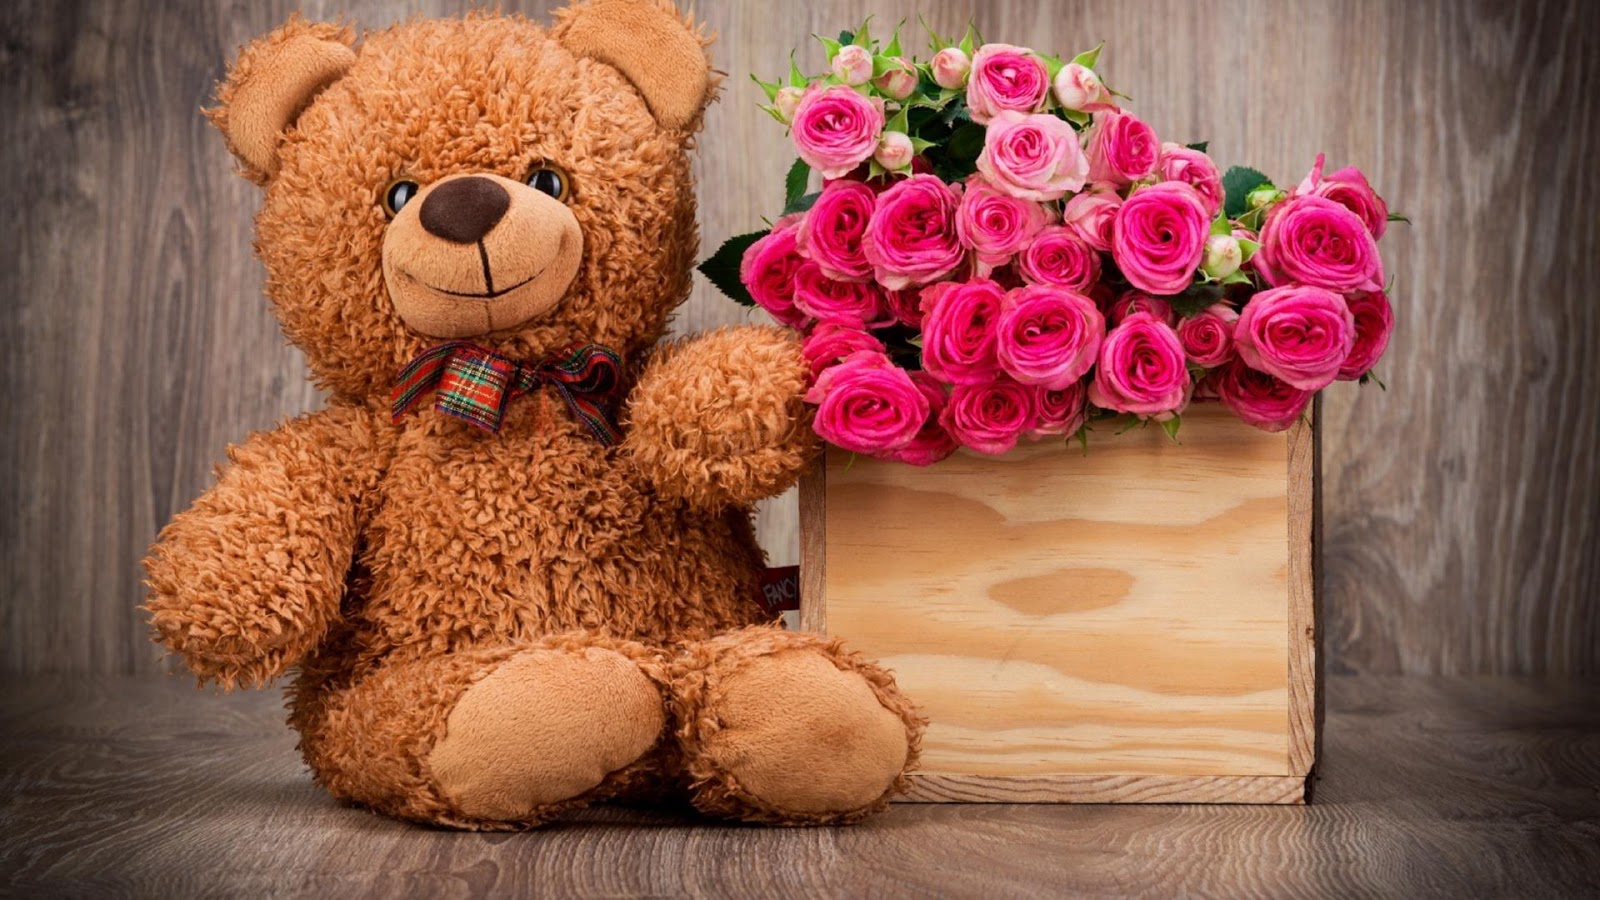 Unnamed - Happy Teddy Day Full Hd Images Download - HD Wallpaper 